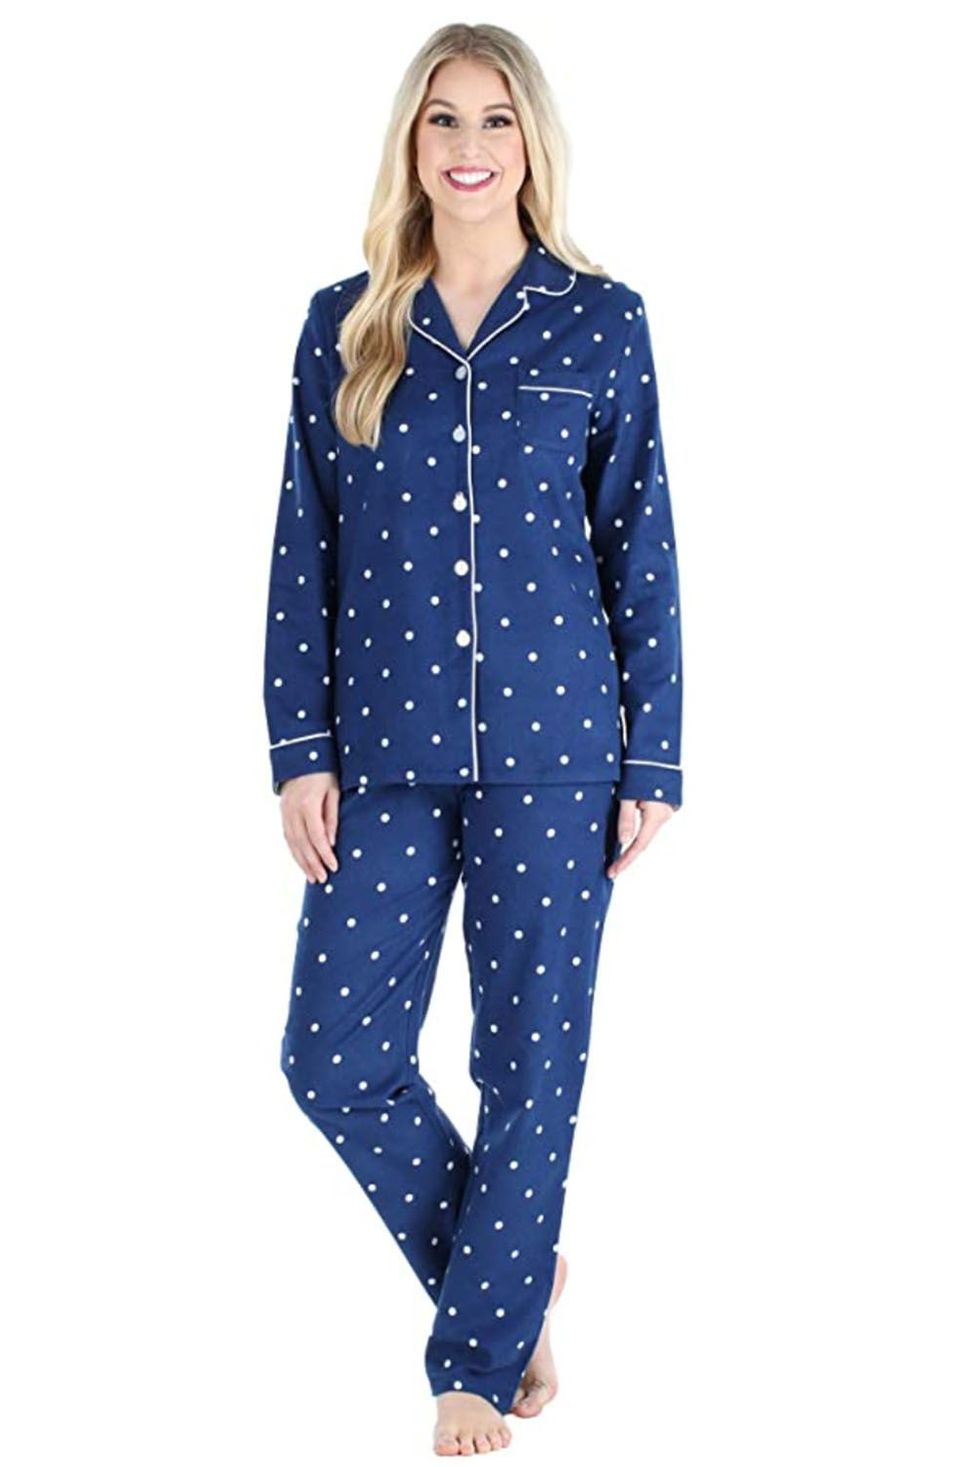 25 Best Flannel Pajamas for Women 2023 - Top Flannel PJ Sets and Pants